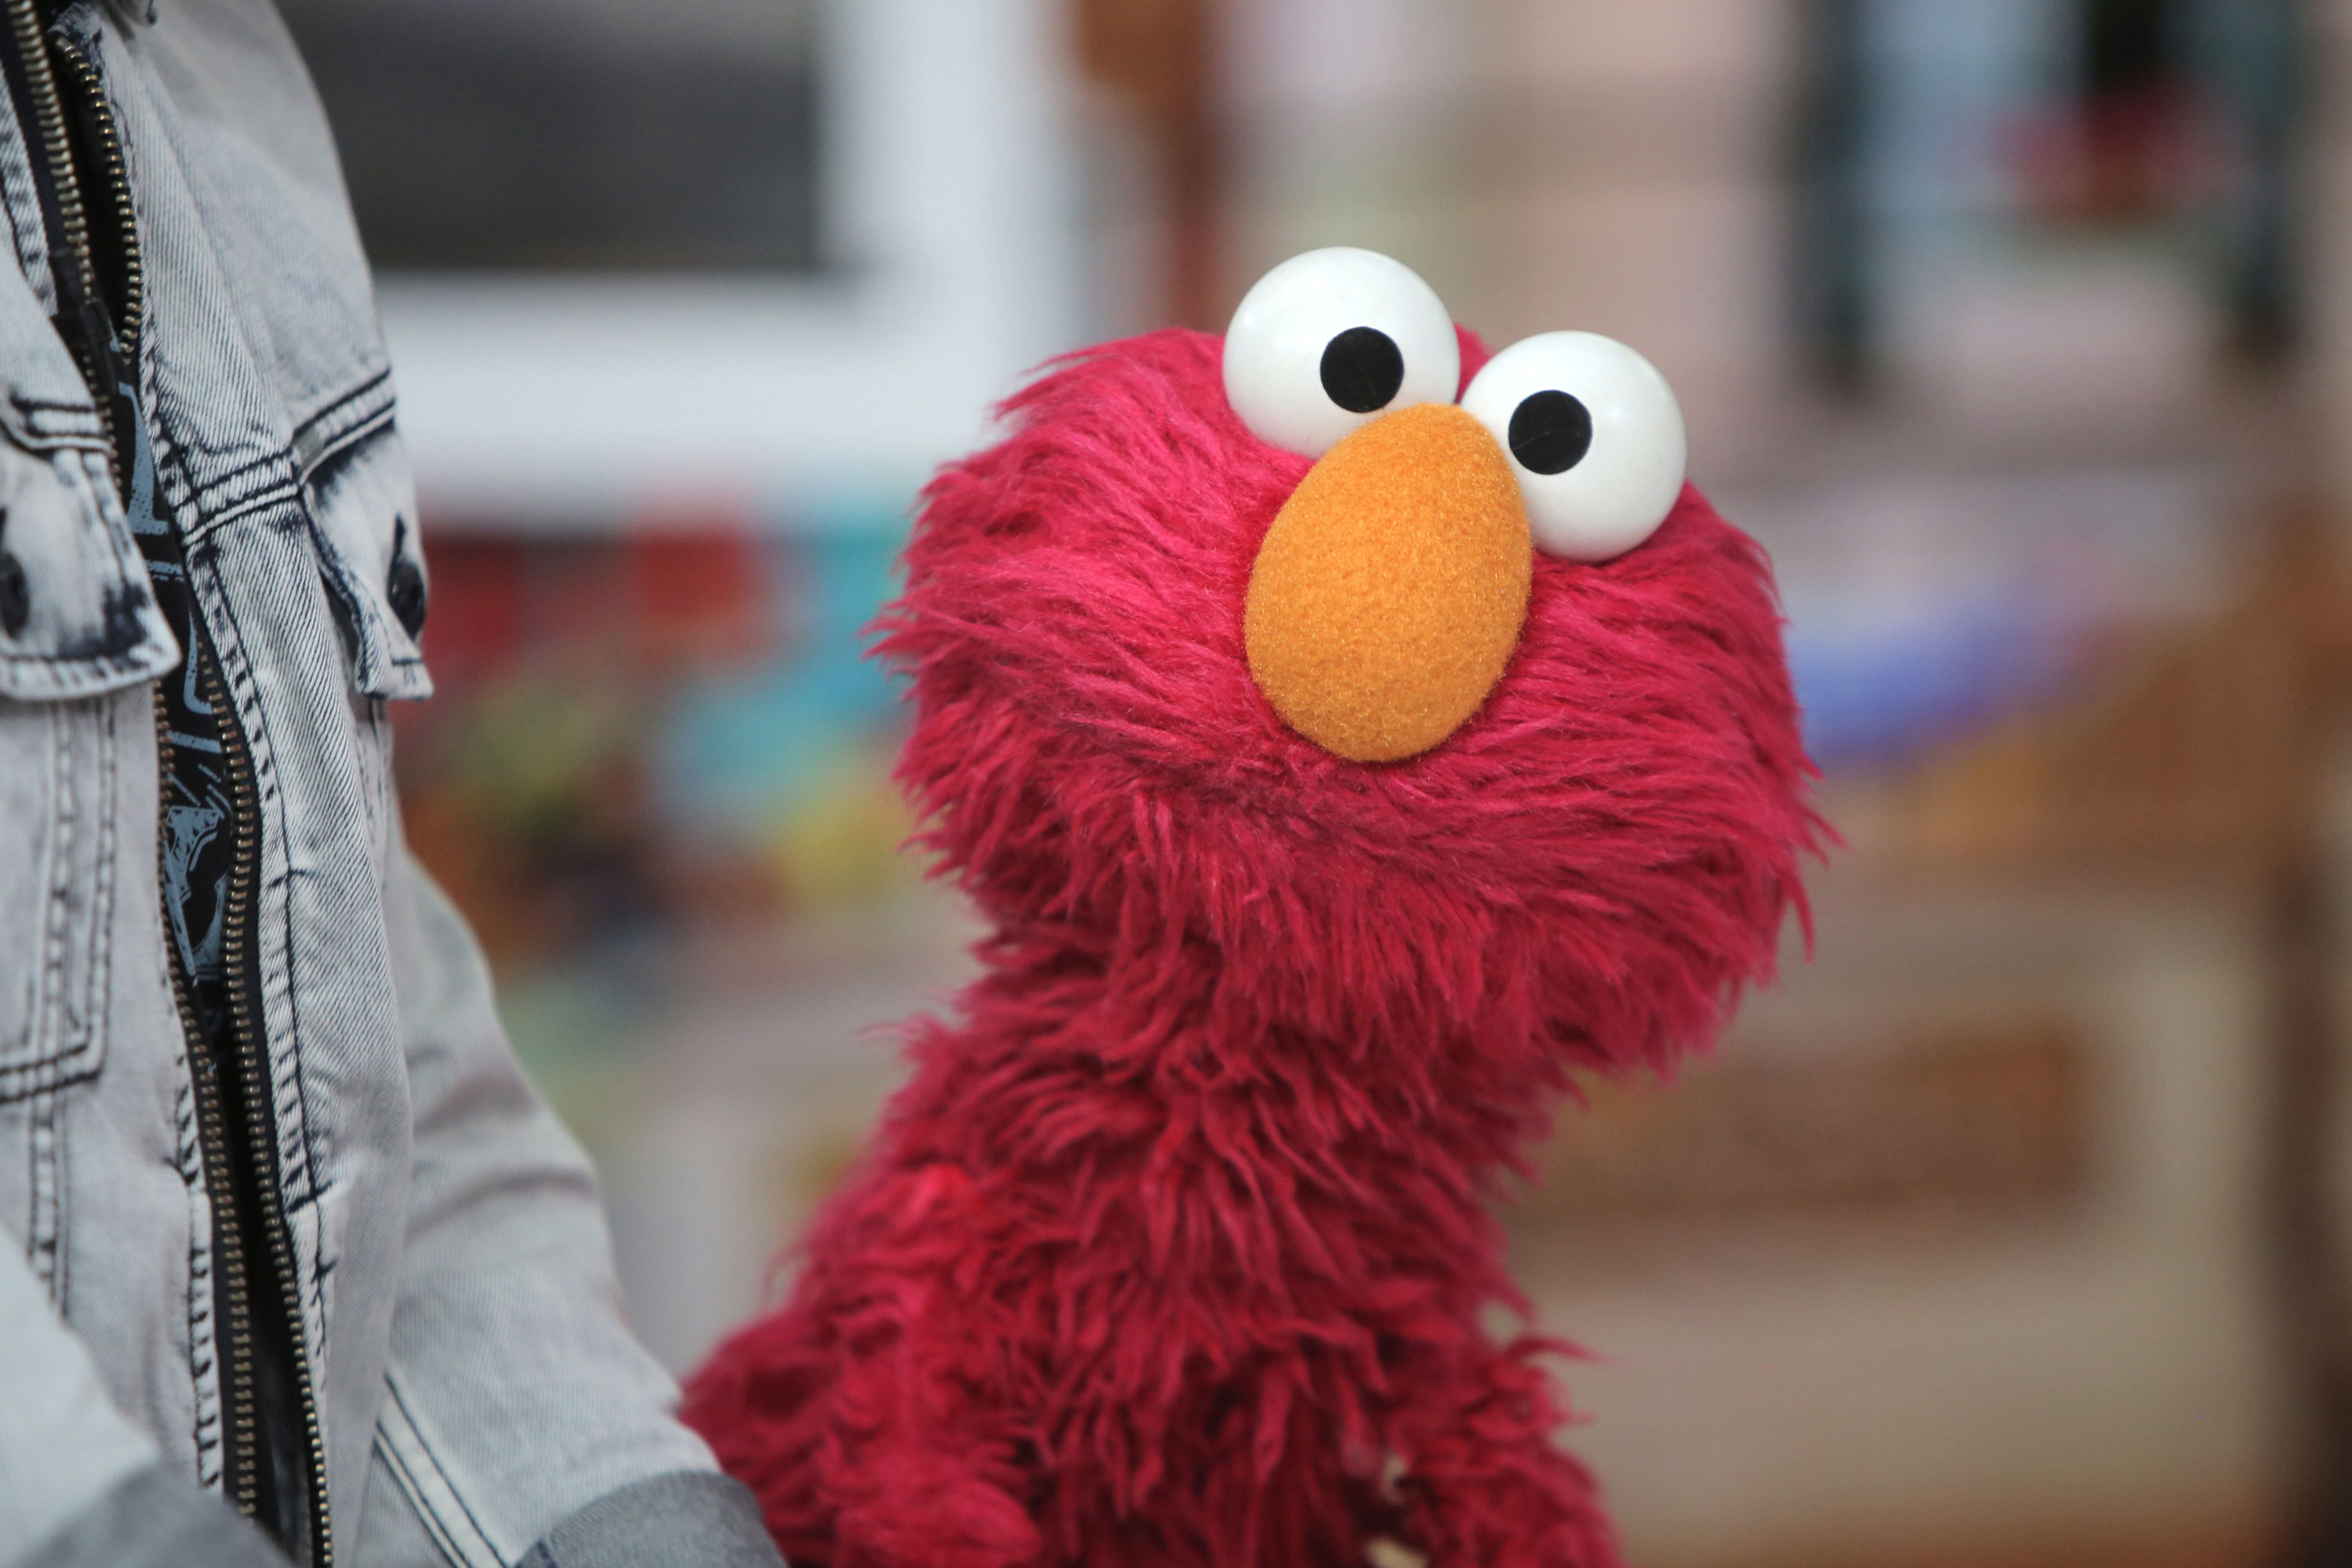 Sesame Street muppet Elmo had a run-in with New York cops while posing for pictures with tourists